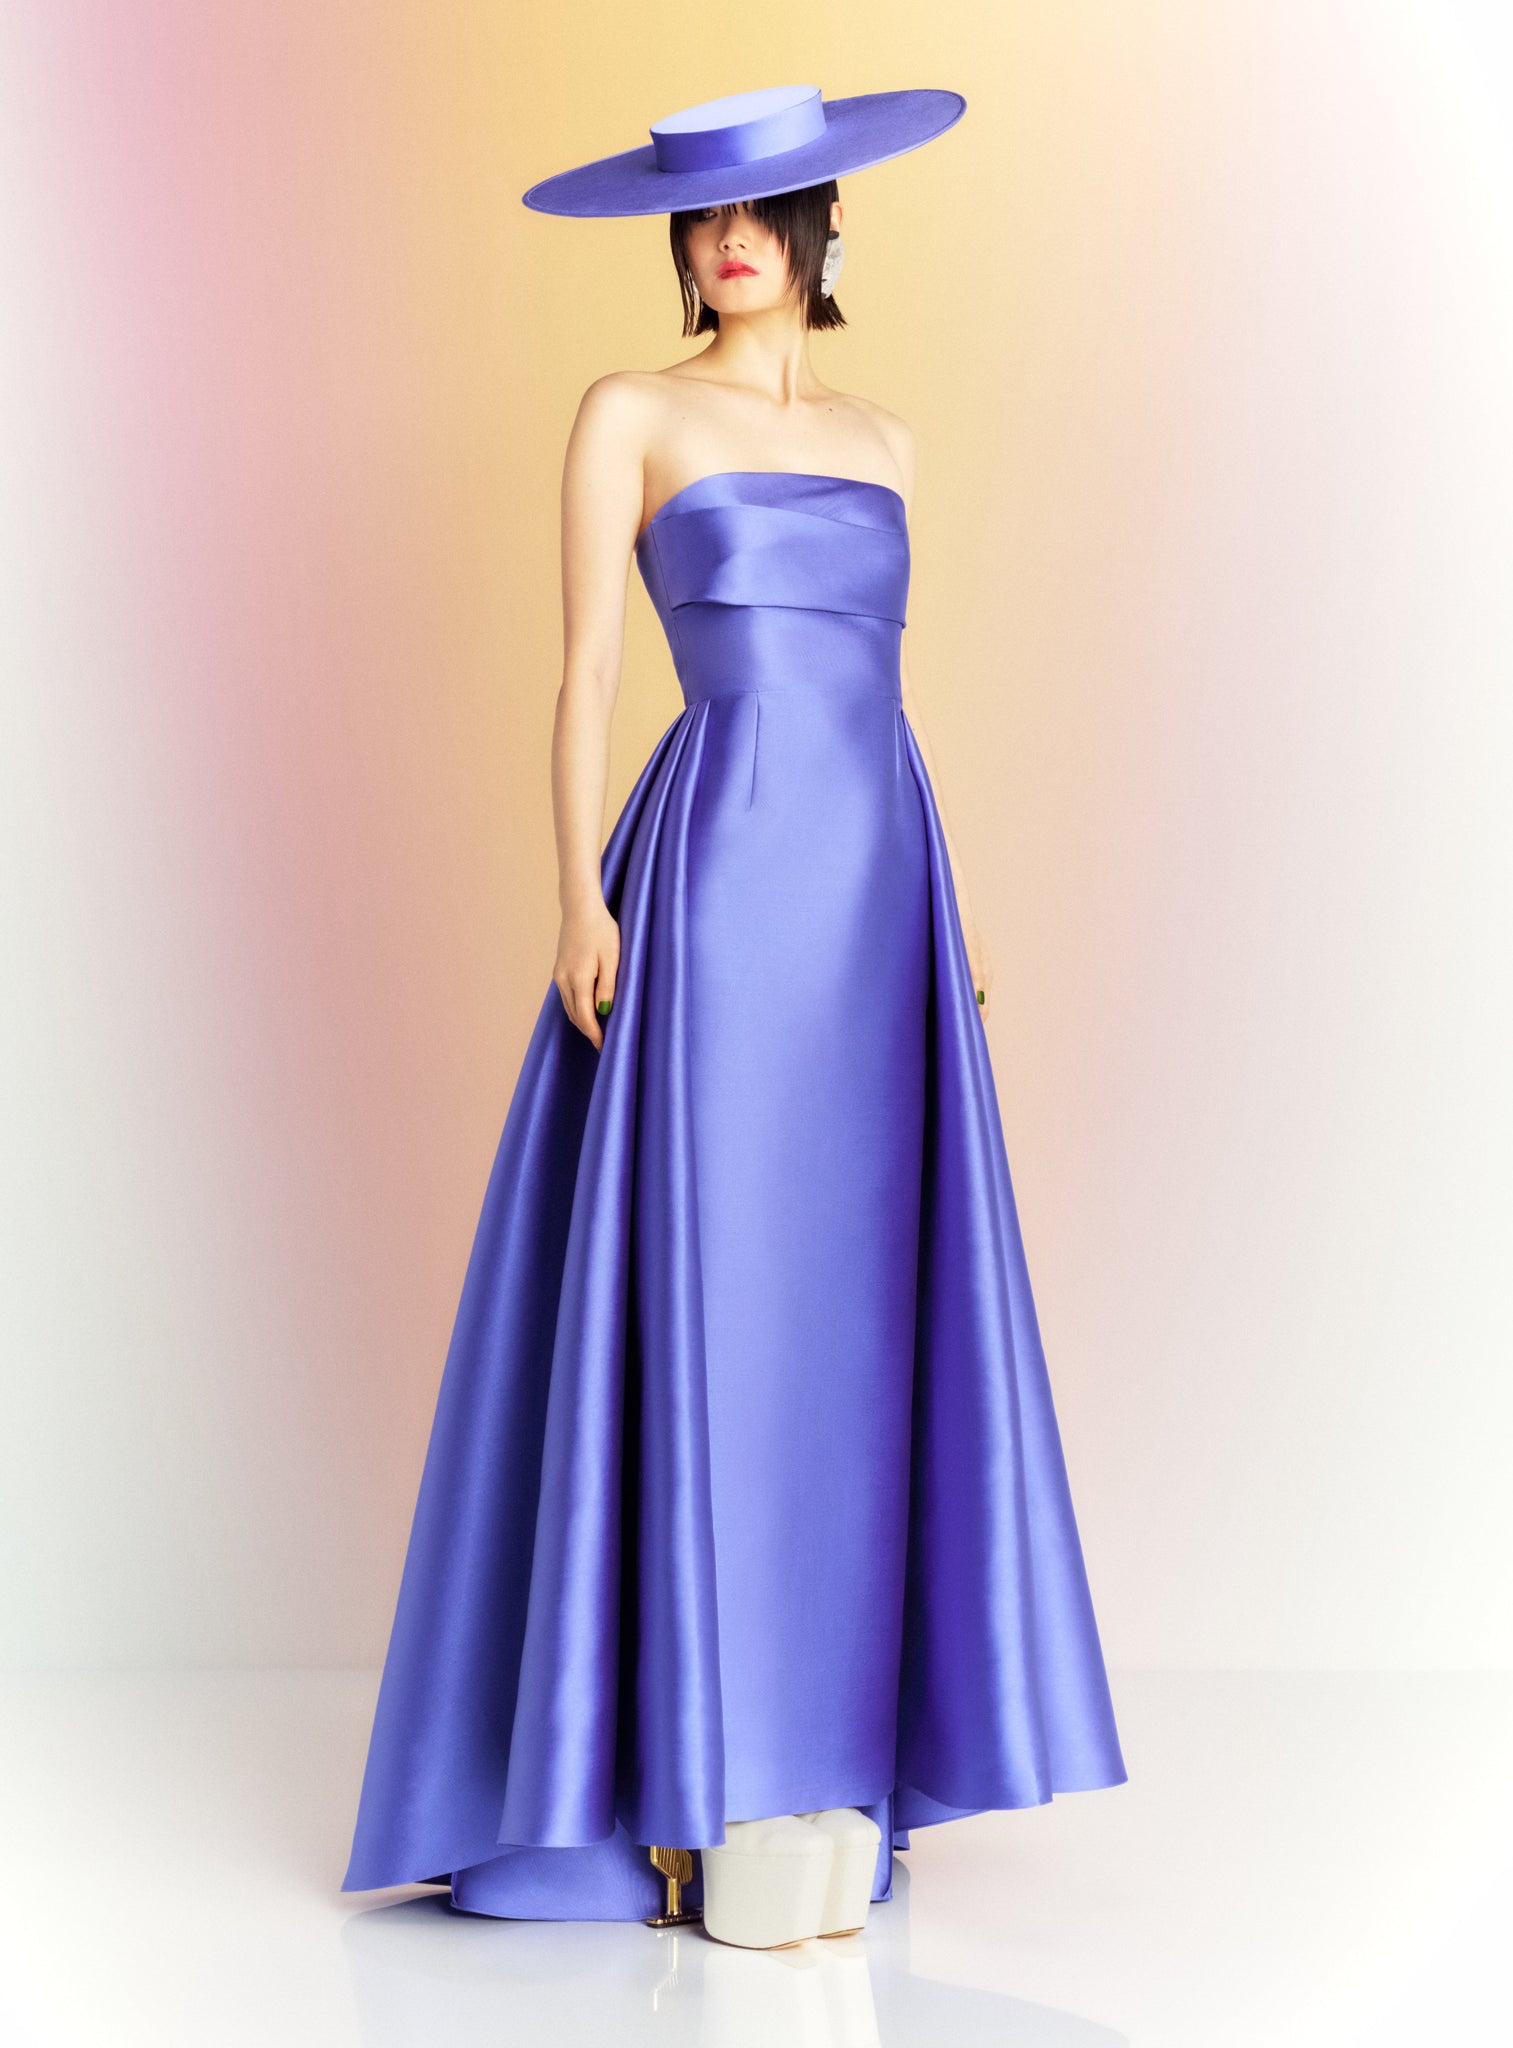 The Tiffany Maxi Dress in Periwinkle